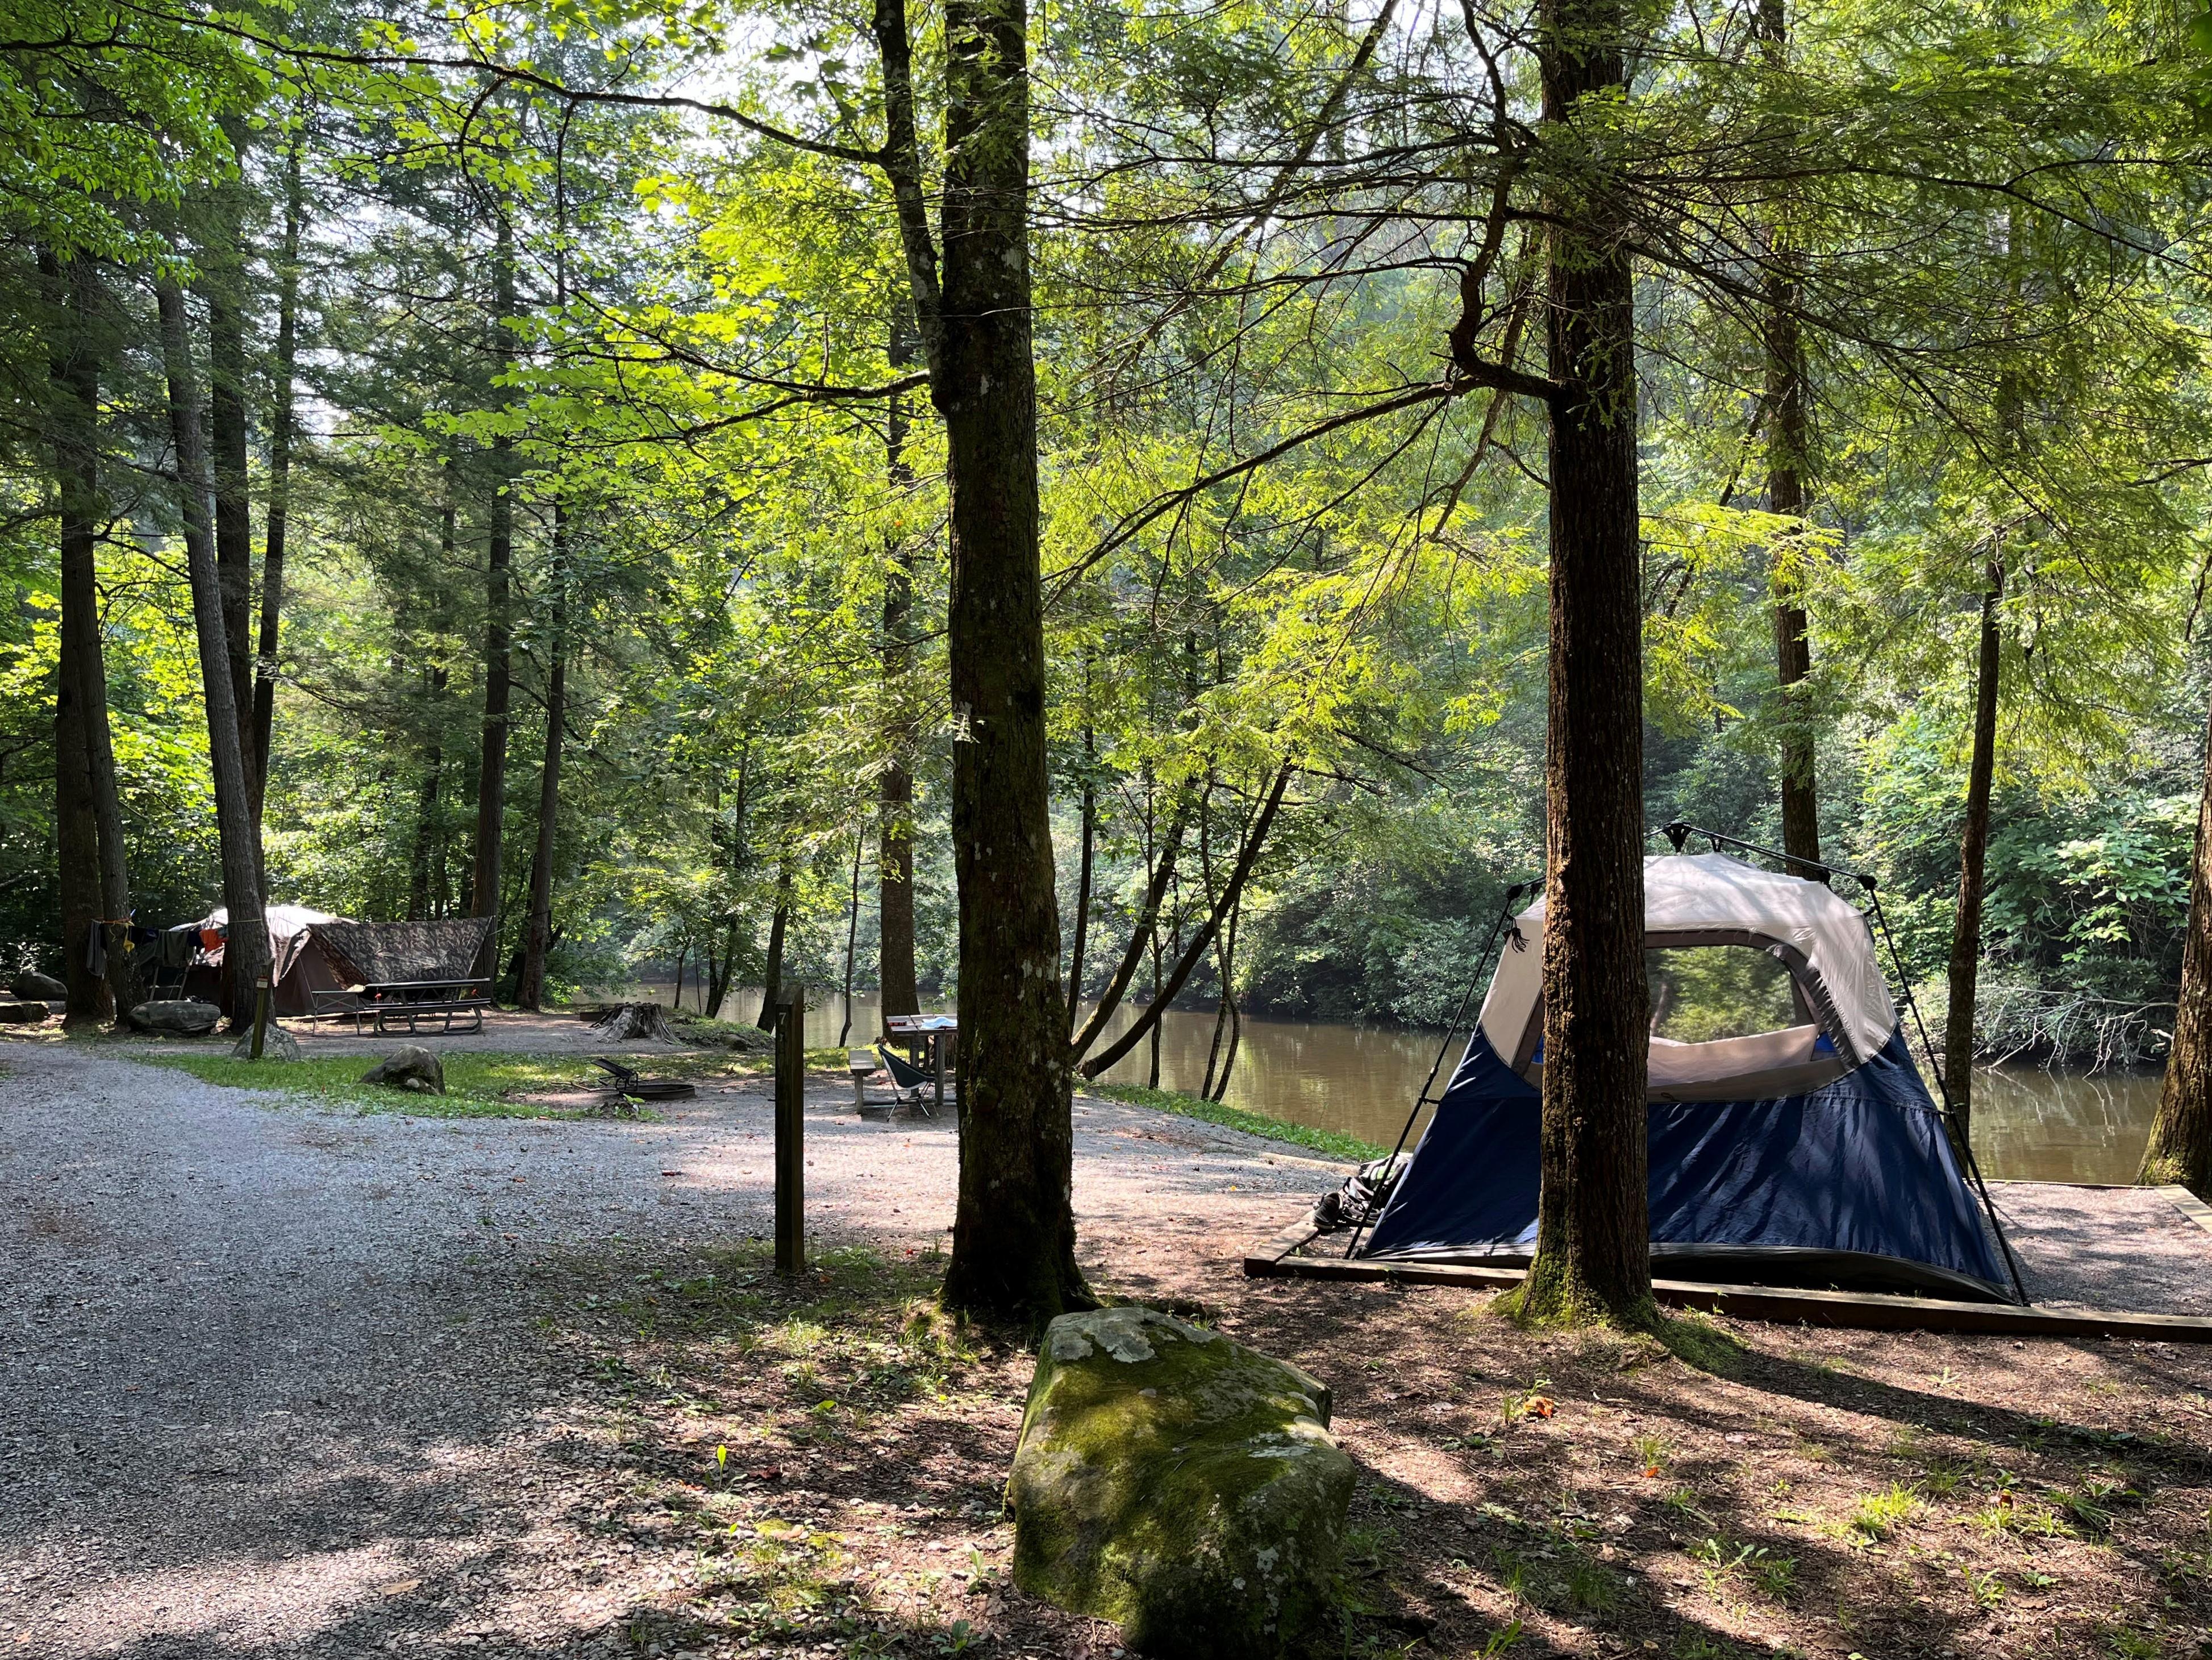 Three campsites in a forested area near a creek, one with a large blue and white tent.